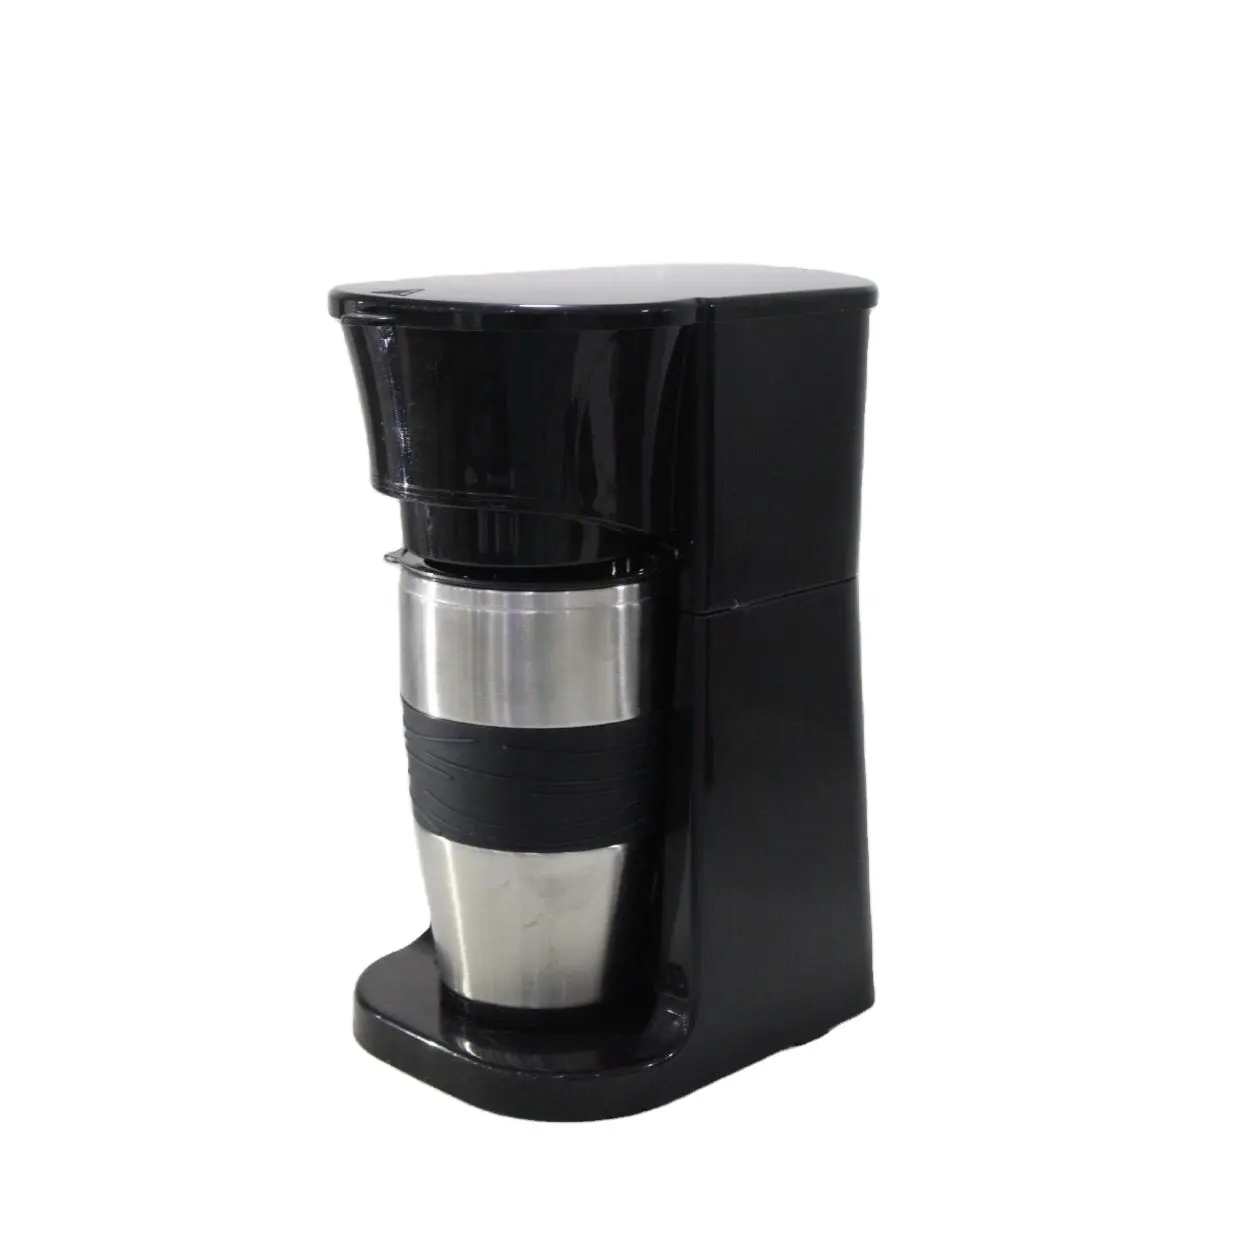 Personal Filter Coffee Maker CP-12 High Quality from Turkey Filter Coffee Maker Stainless Steel Mug 750W good price different